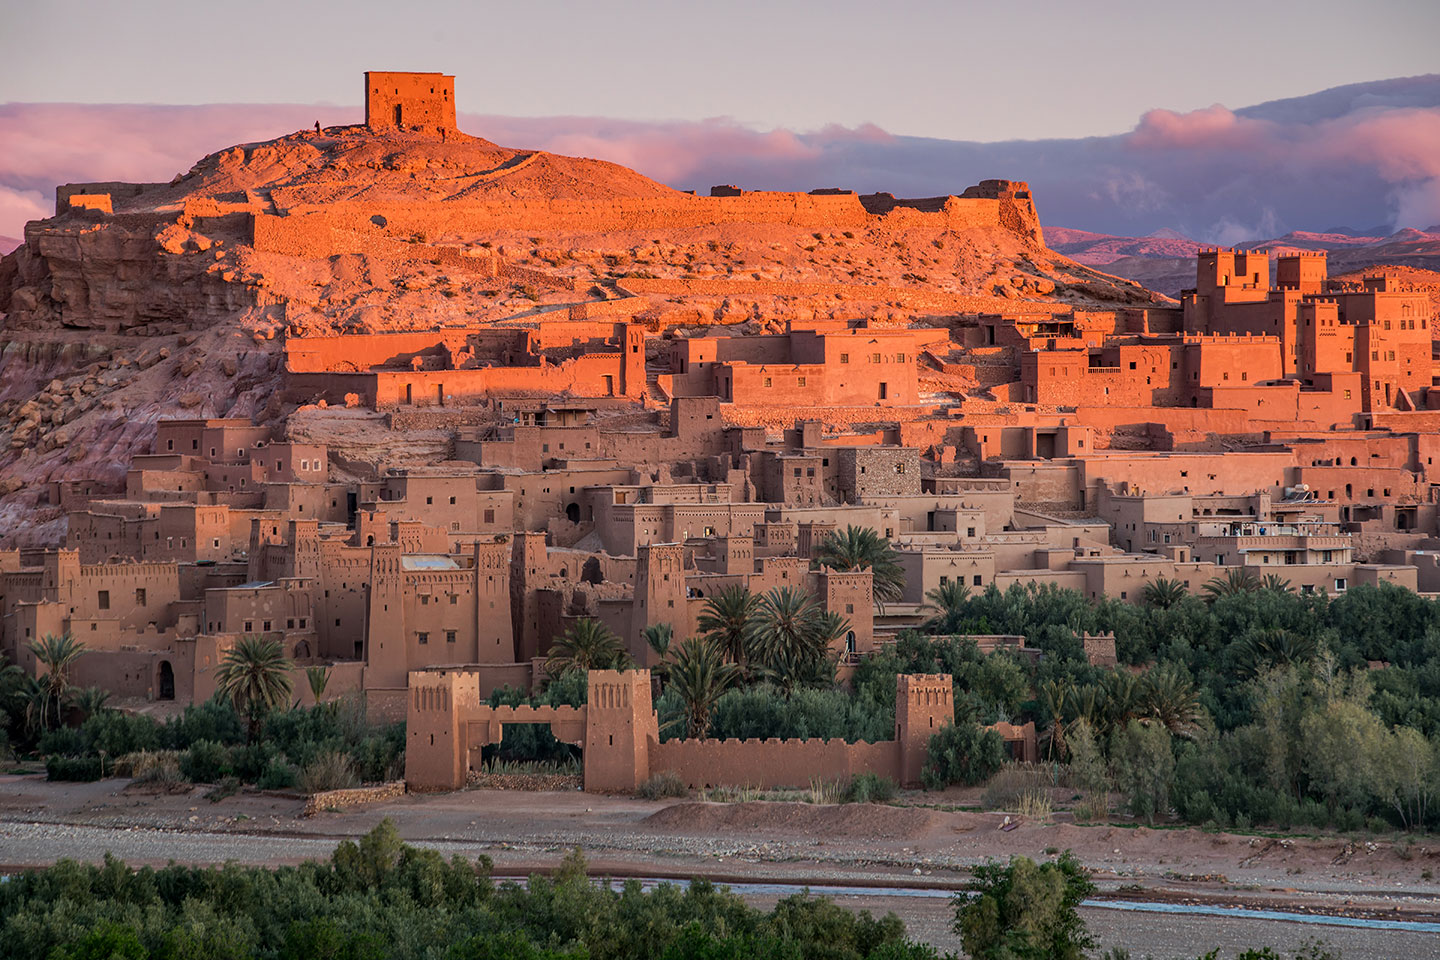 Dramatic sunset over Aït Benhaddou Kasbah in Morocco during a travel photography trip